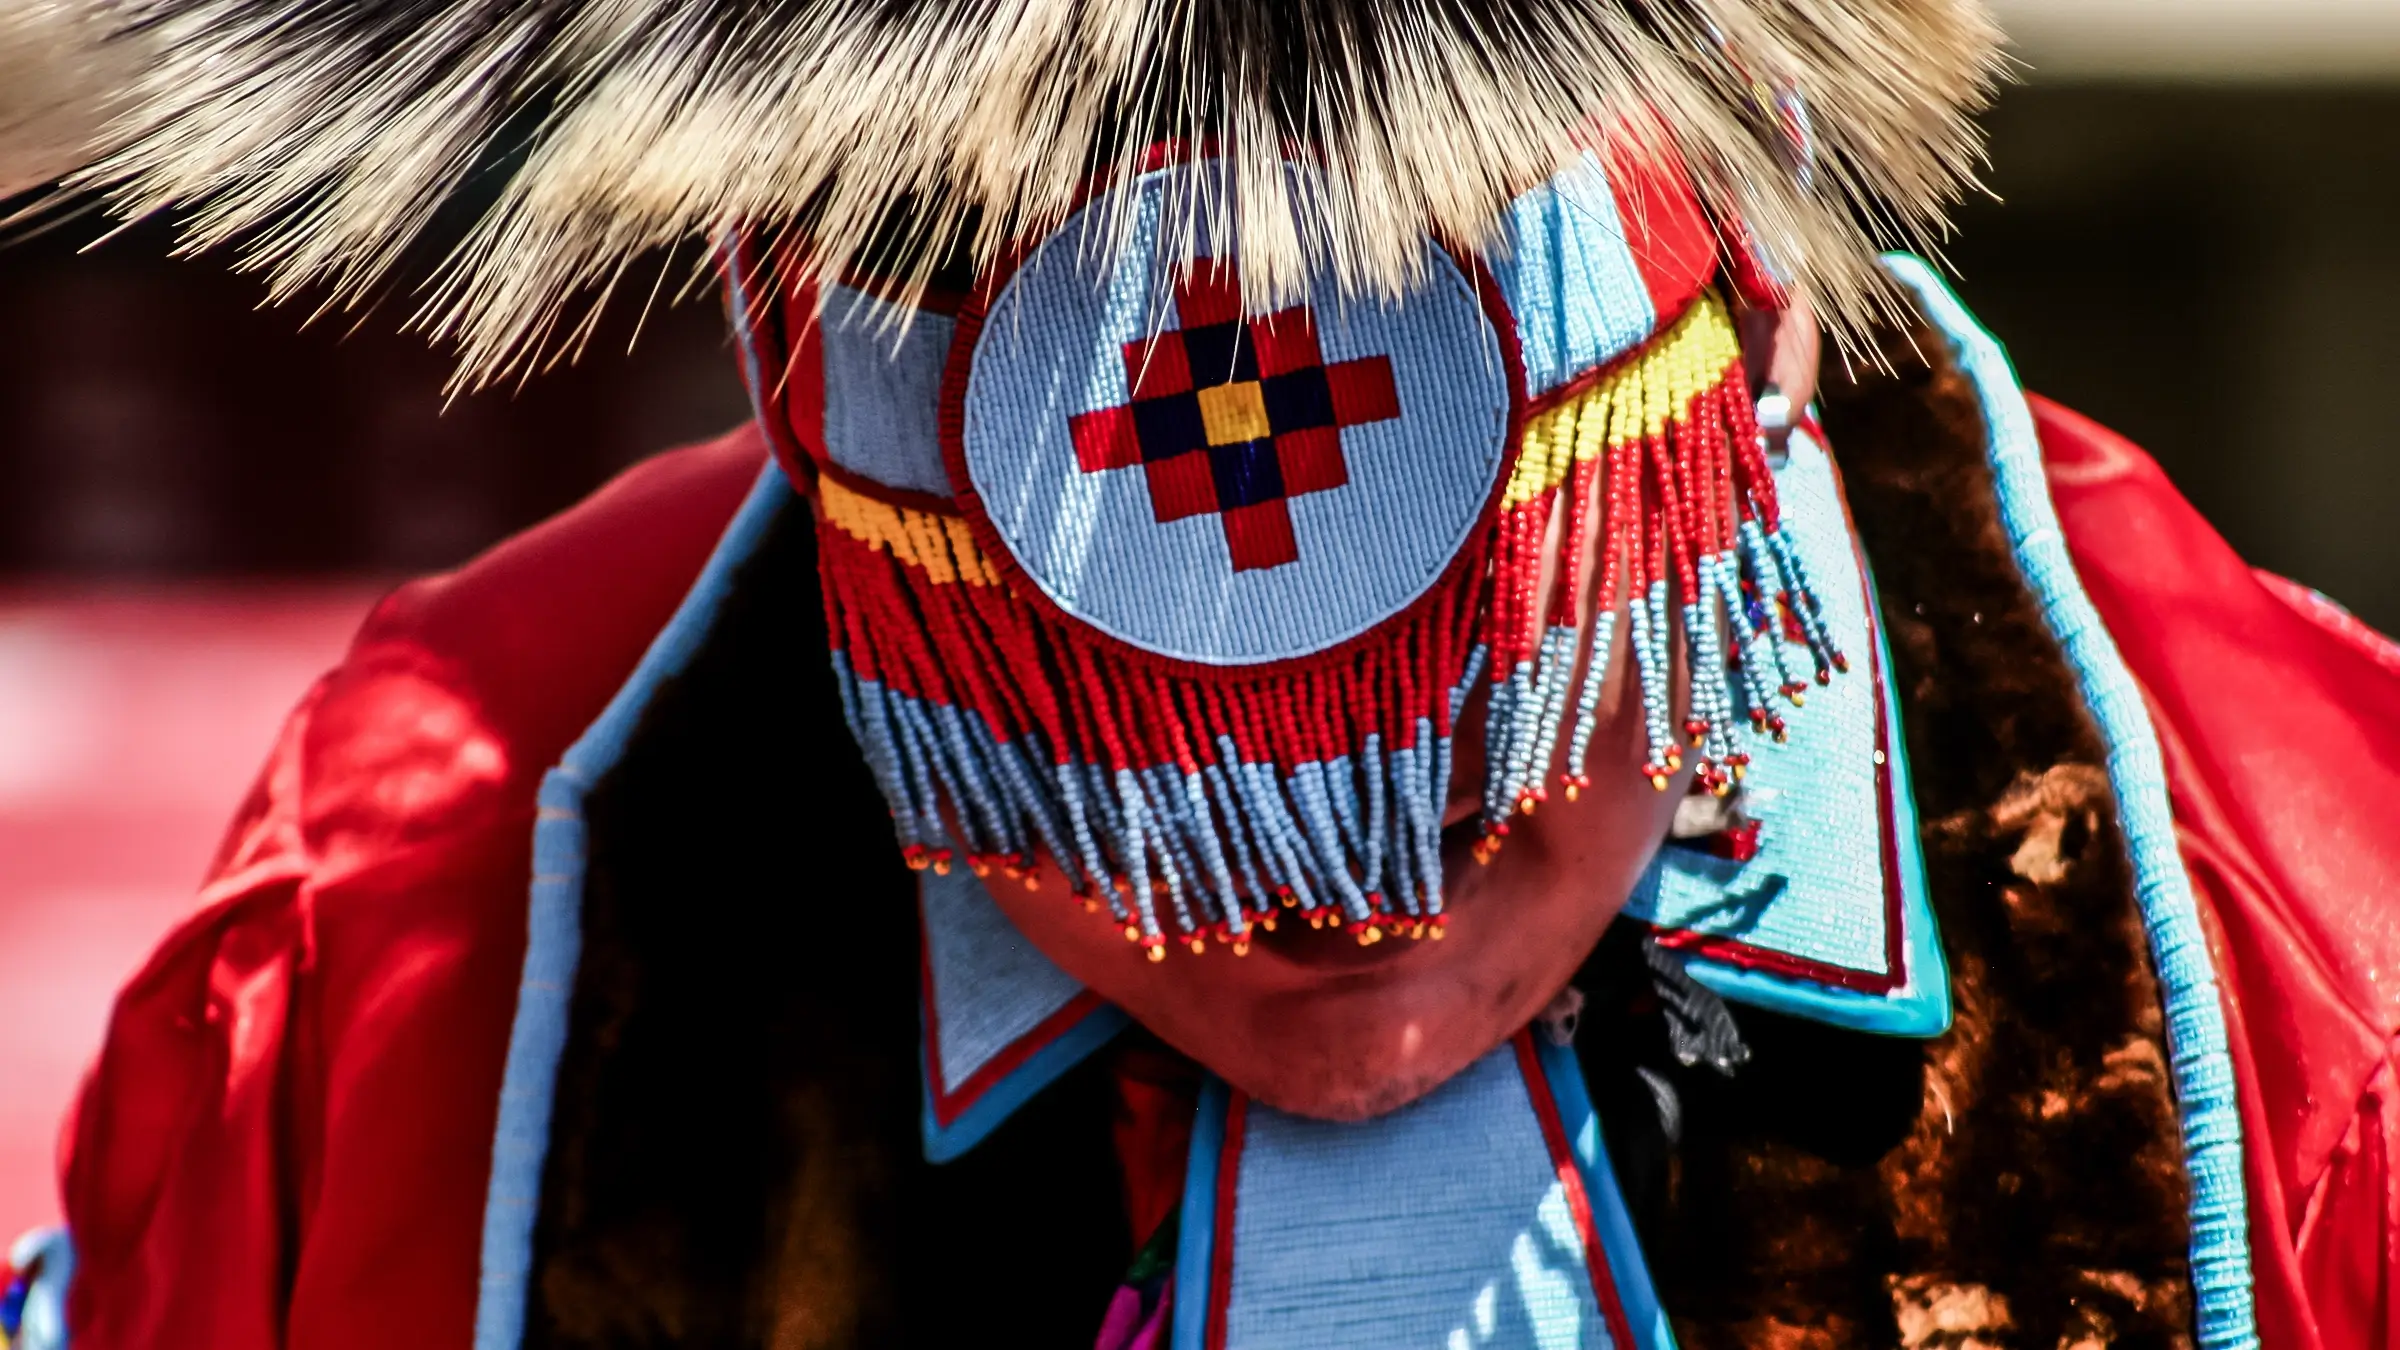 A person dressed in Indigenous clothing